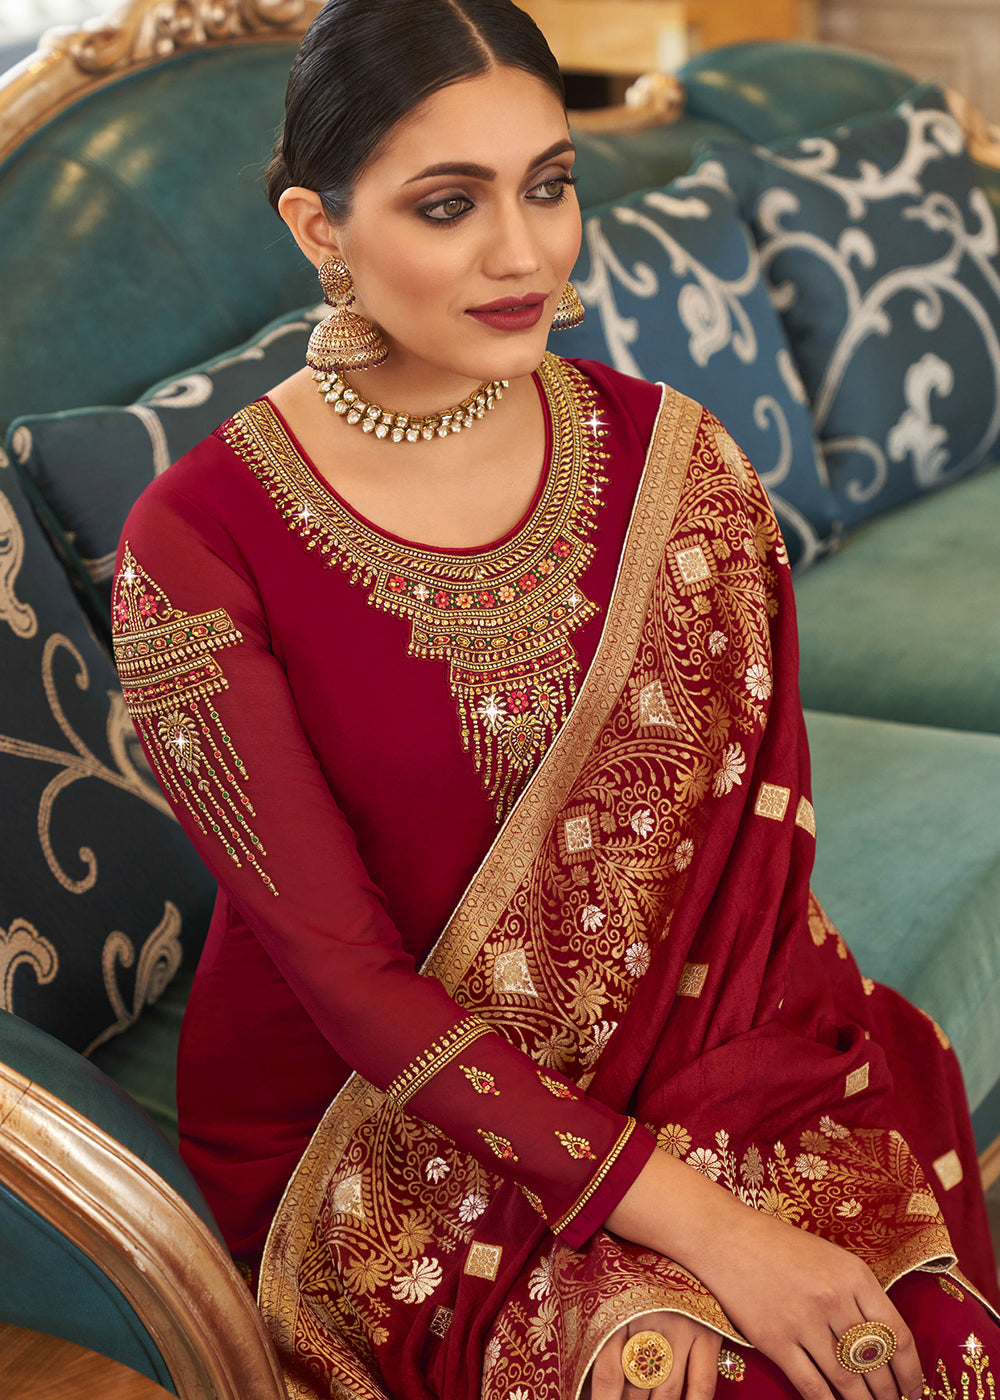 Buy Now Wedding Party Capricious Maroon Thread & Zari Salwar SuitOnline in USA, UK, Canada & Worldwide at Empress Clothing.